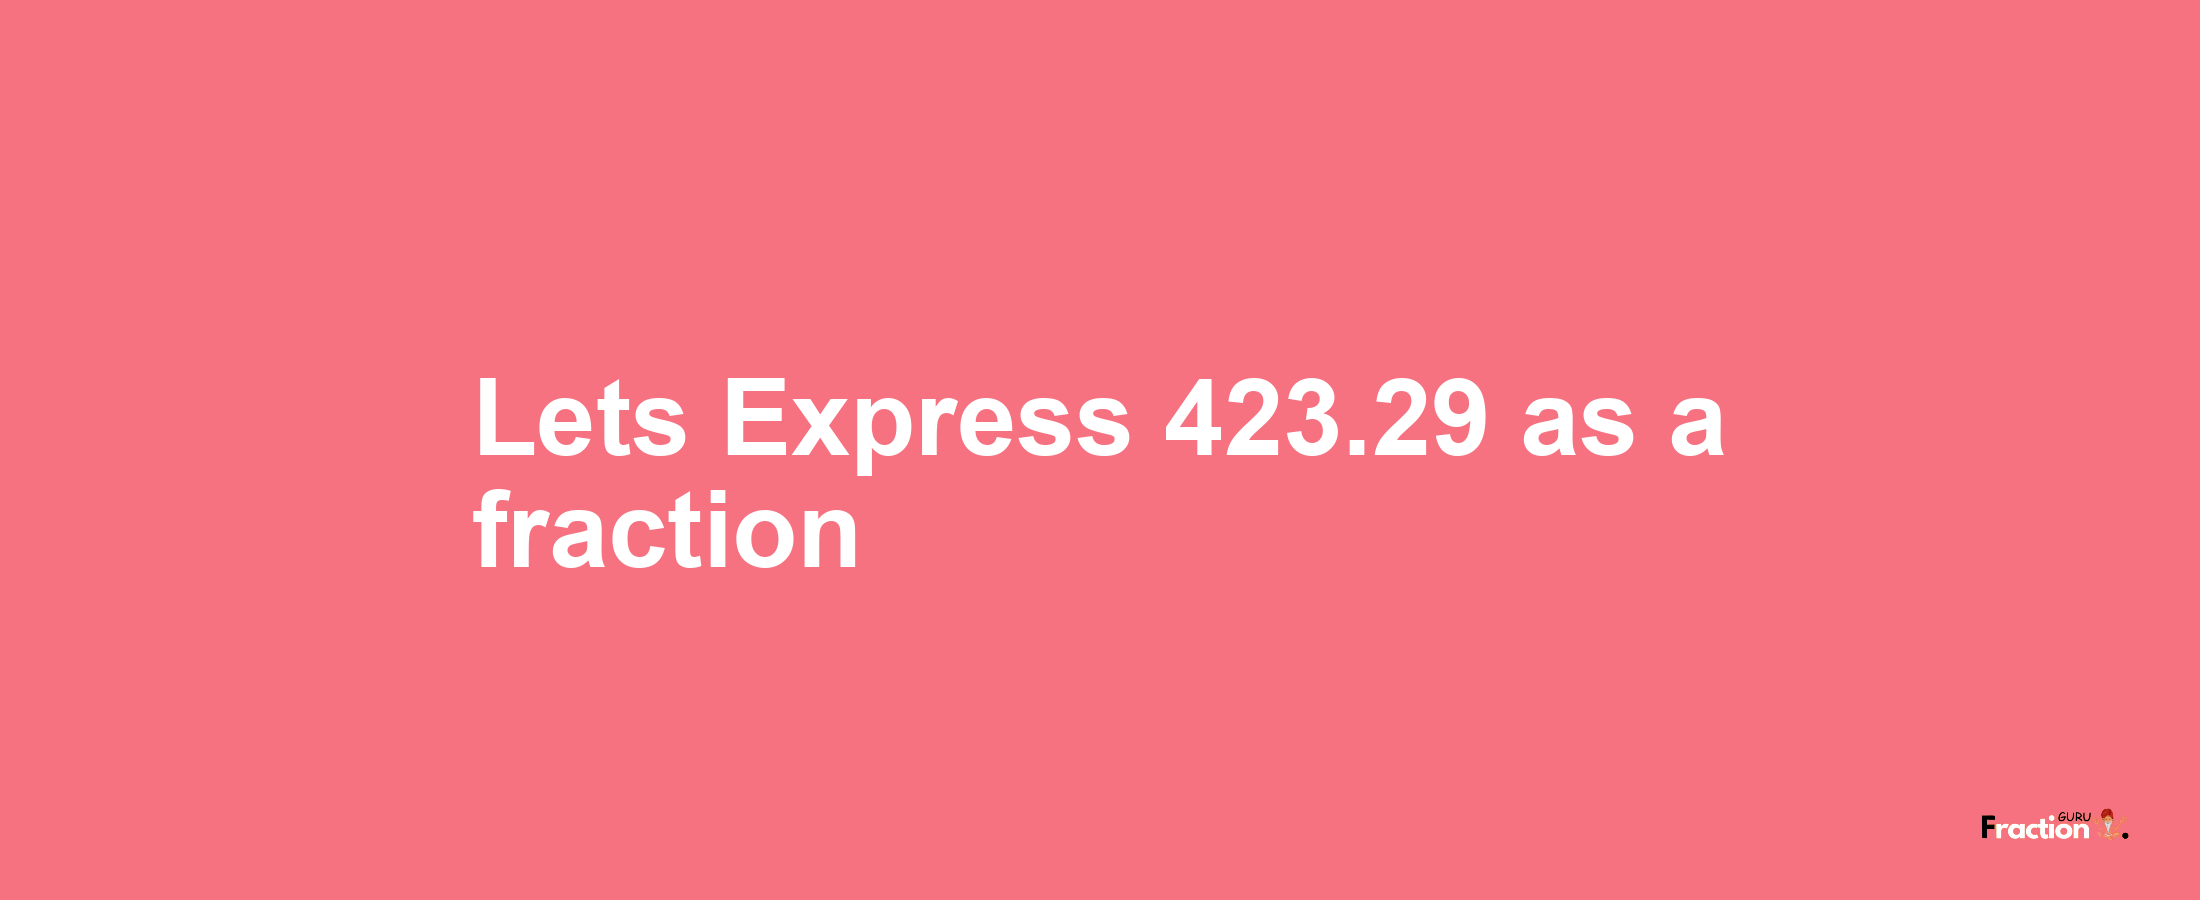 Lets Express 423.29 as afraction